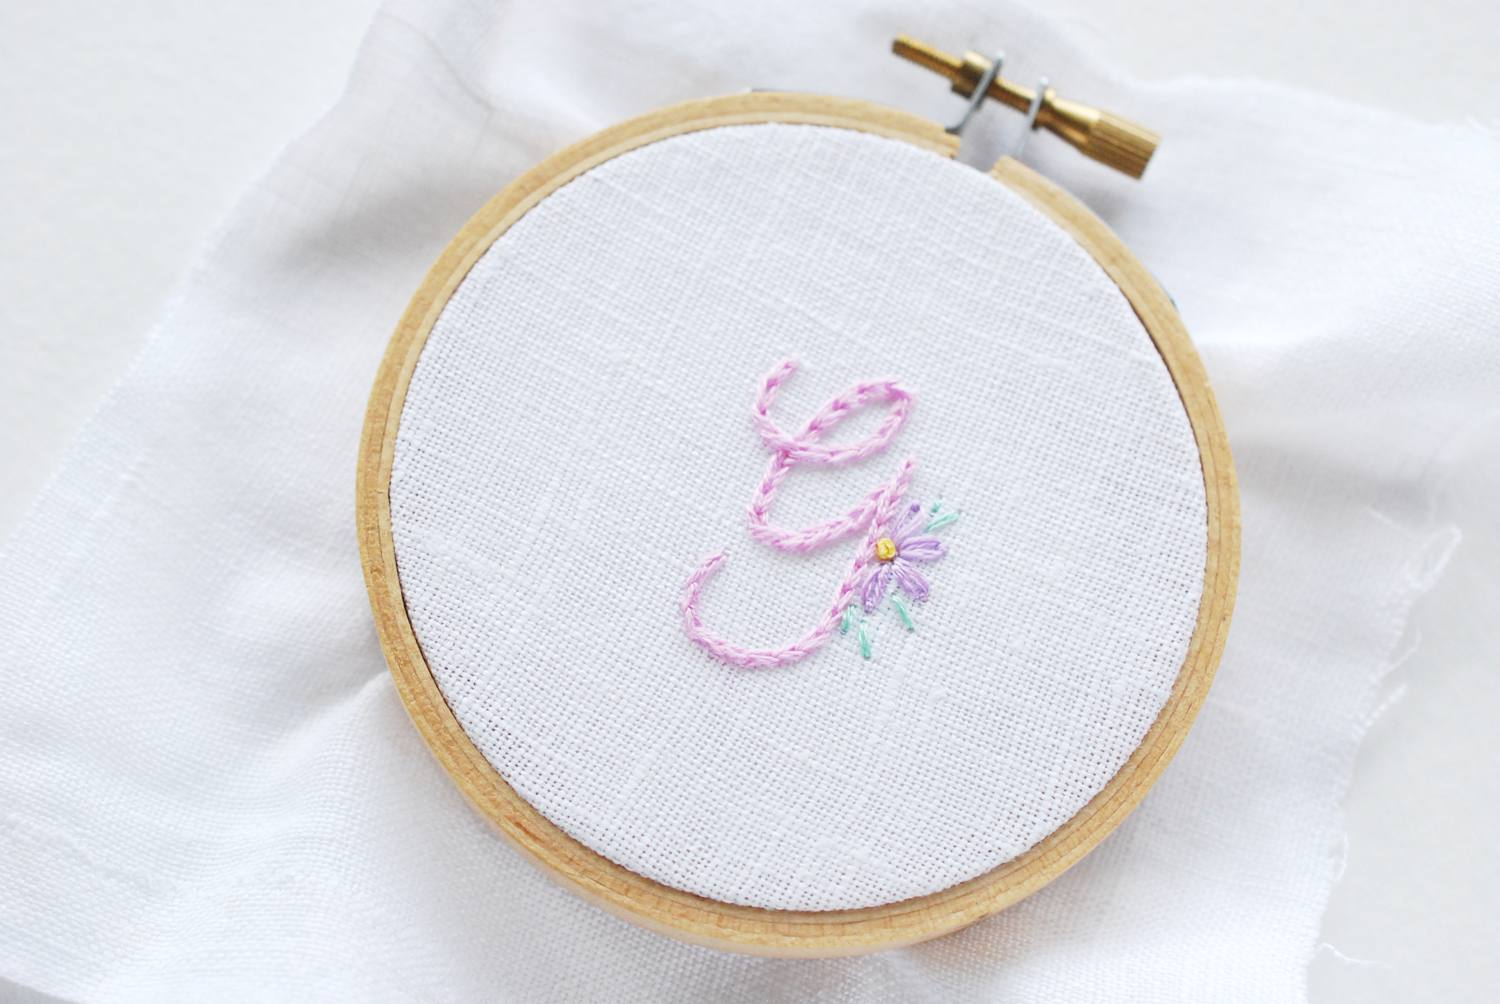 Embroidery Alphabet Patterns Free Free Alphabet Pattern For Monogram Embroidery